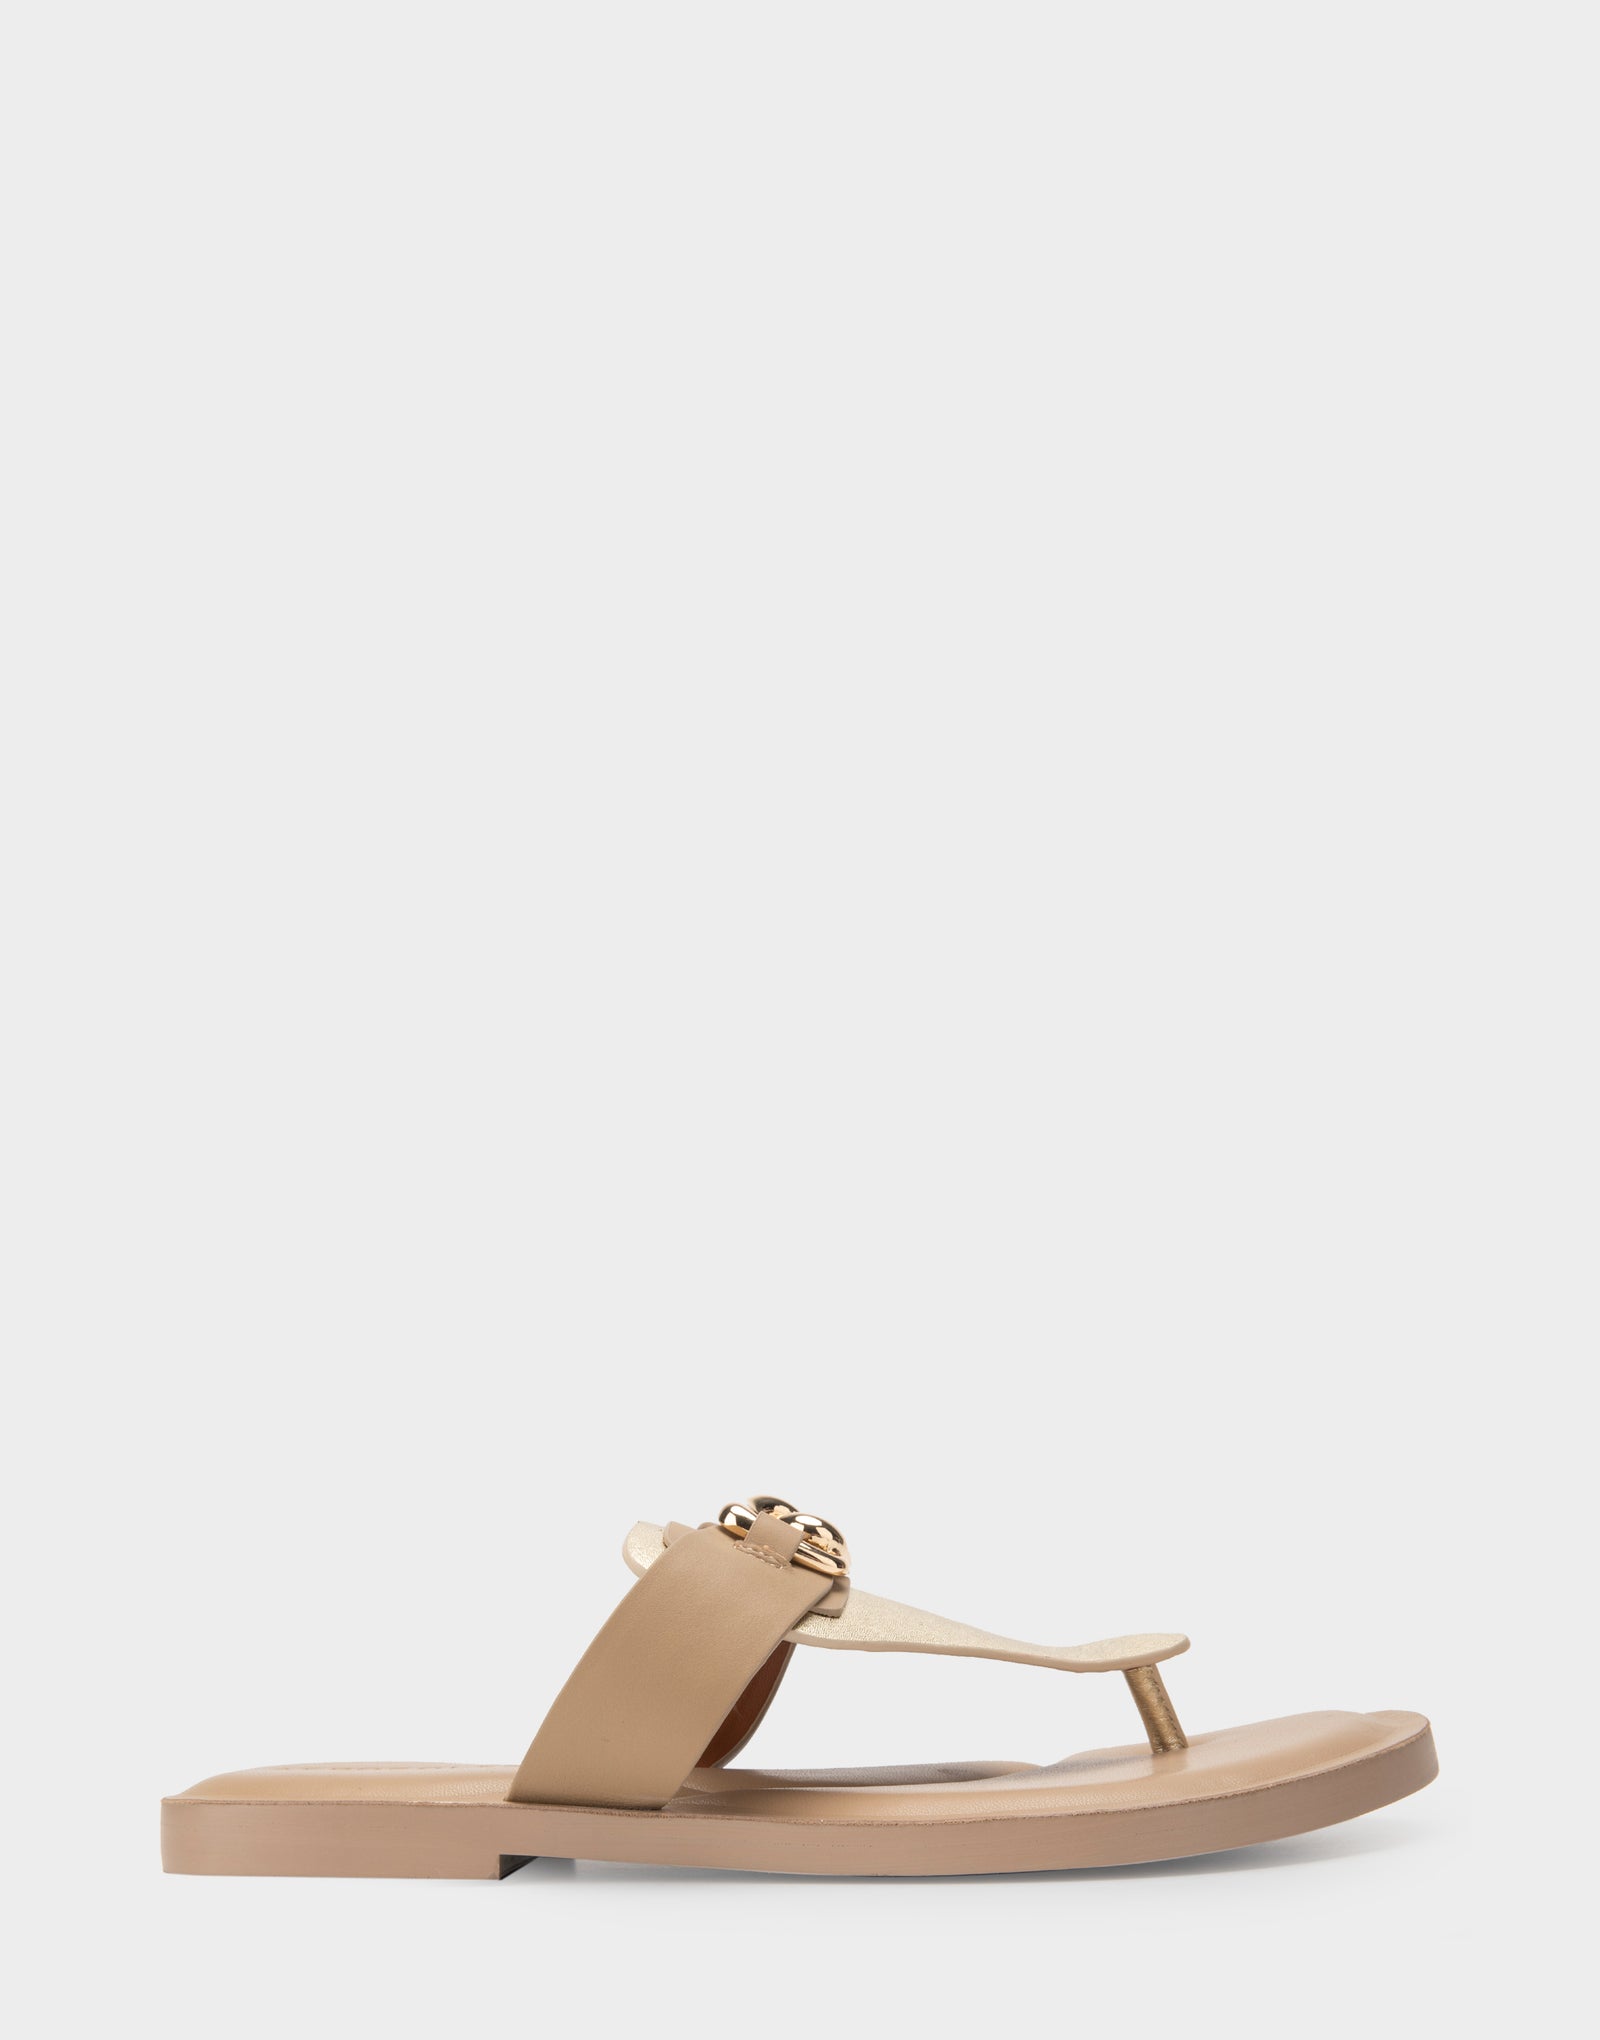 Women's Sandal in Taupe Combo